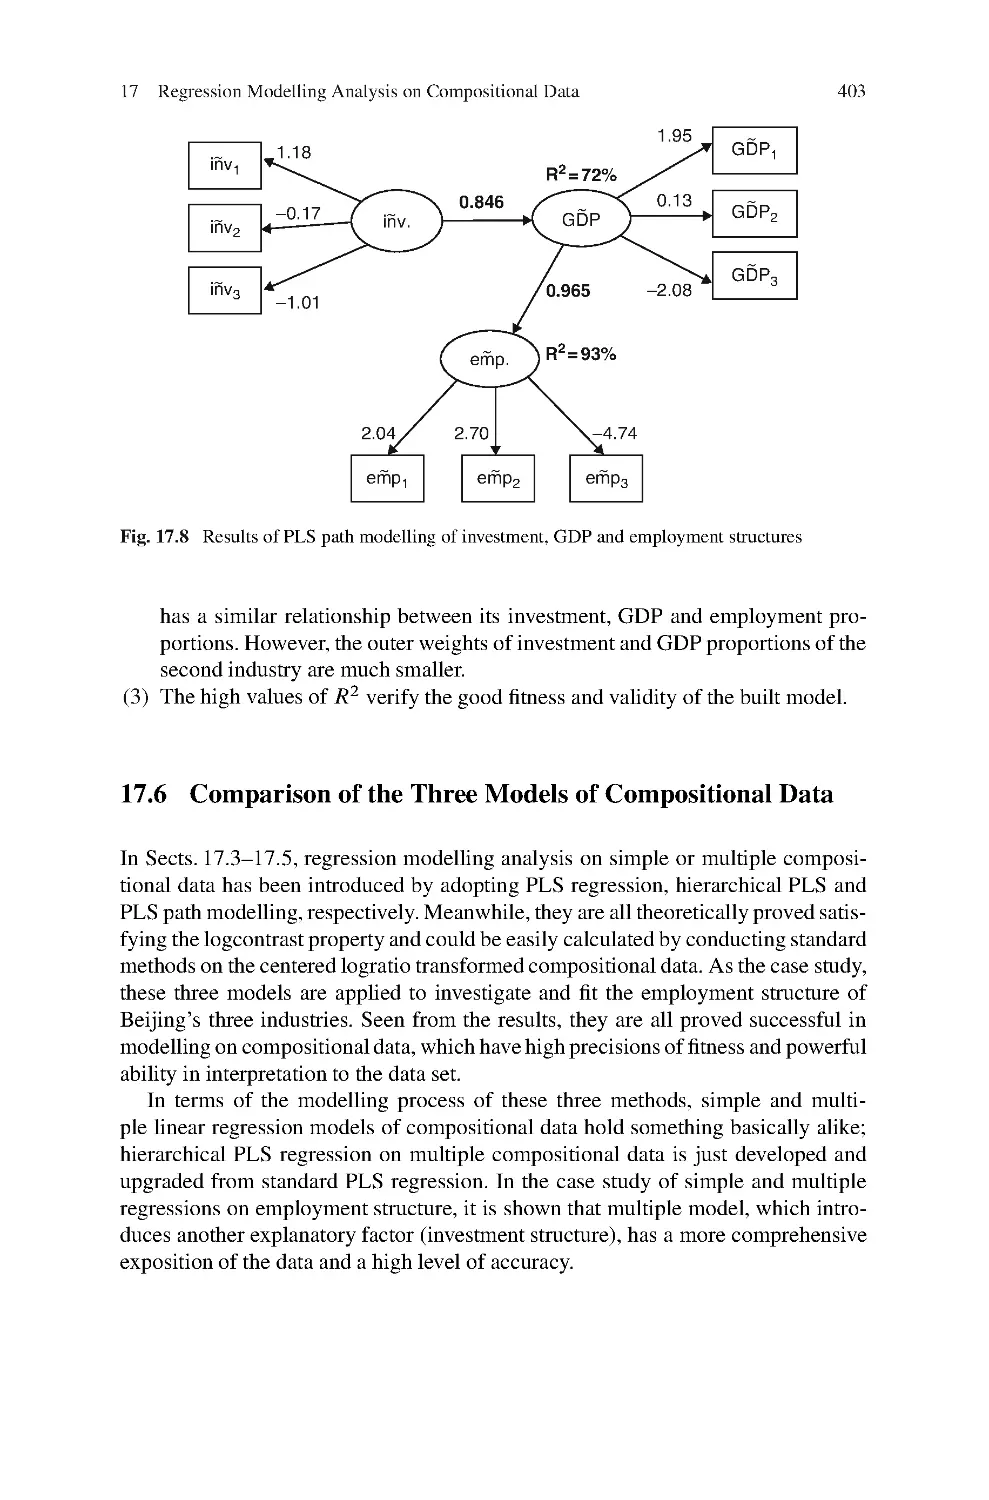 17.6 Comparison of the Three Models of Compositional Data